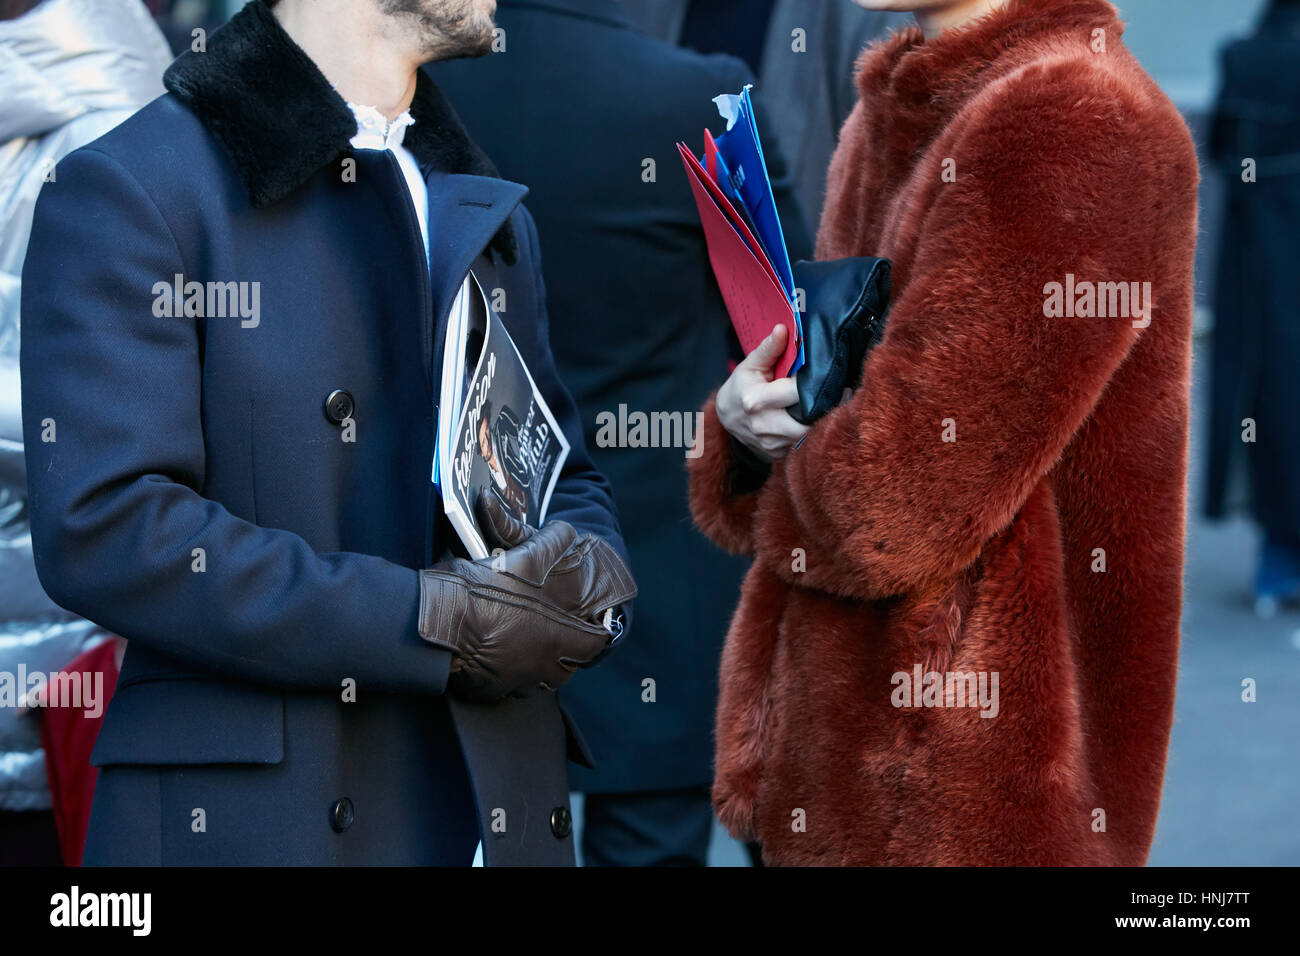 Men with brown fur and blue jacket talking before MSGM fashion show, Milan Fashion Week street style on January 16, 2017 in Milan. Stock Photo